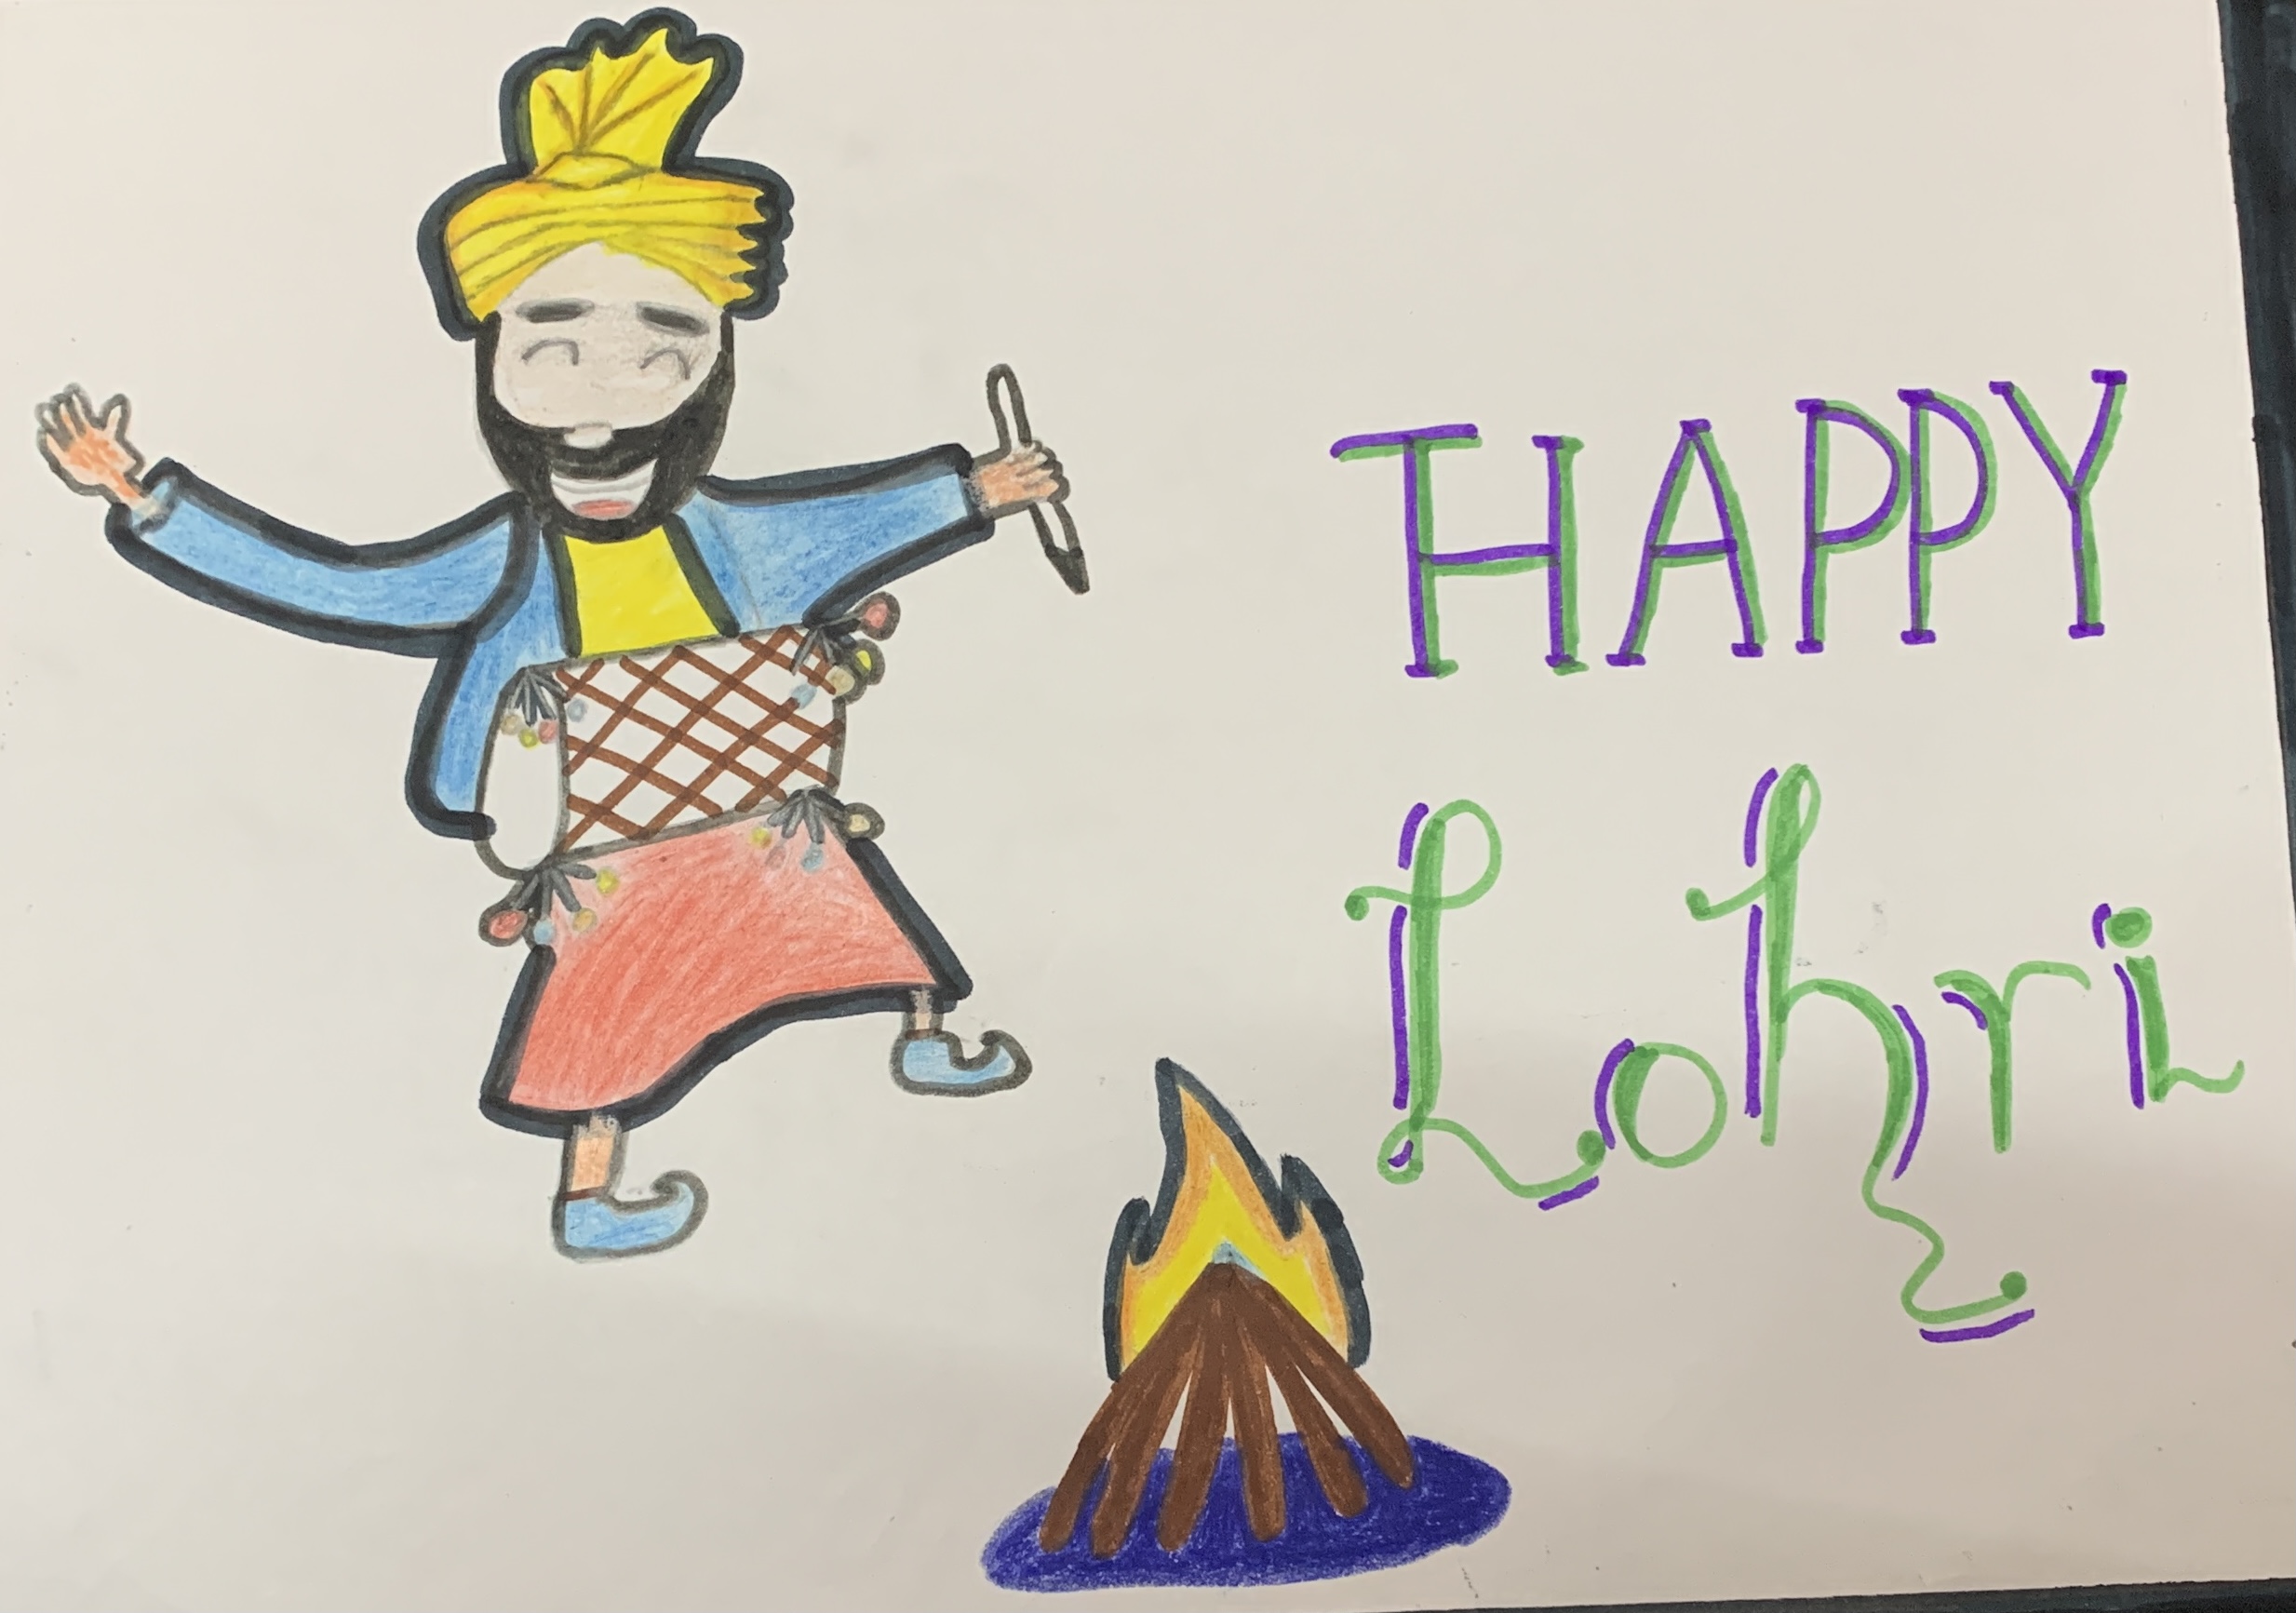 Happy Lohri! Eat THIS, not THAT chickpeas popcorn revri alcohol vegetable  juice chicken at the Lohri party to lose weight! | Health Tips and News